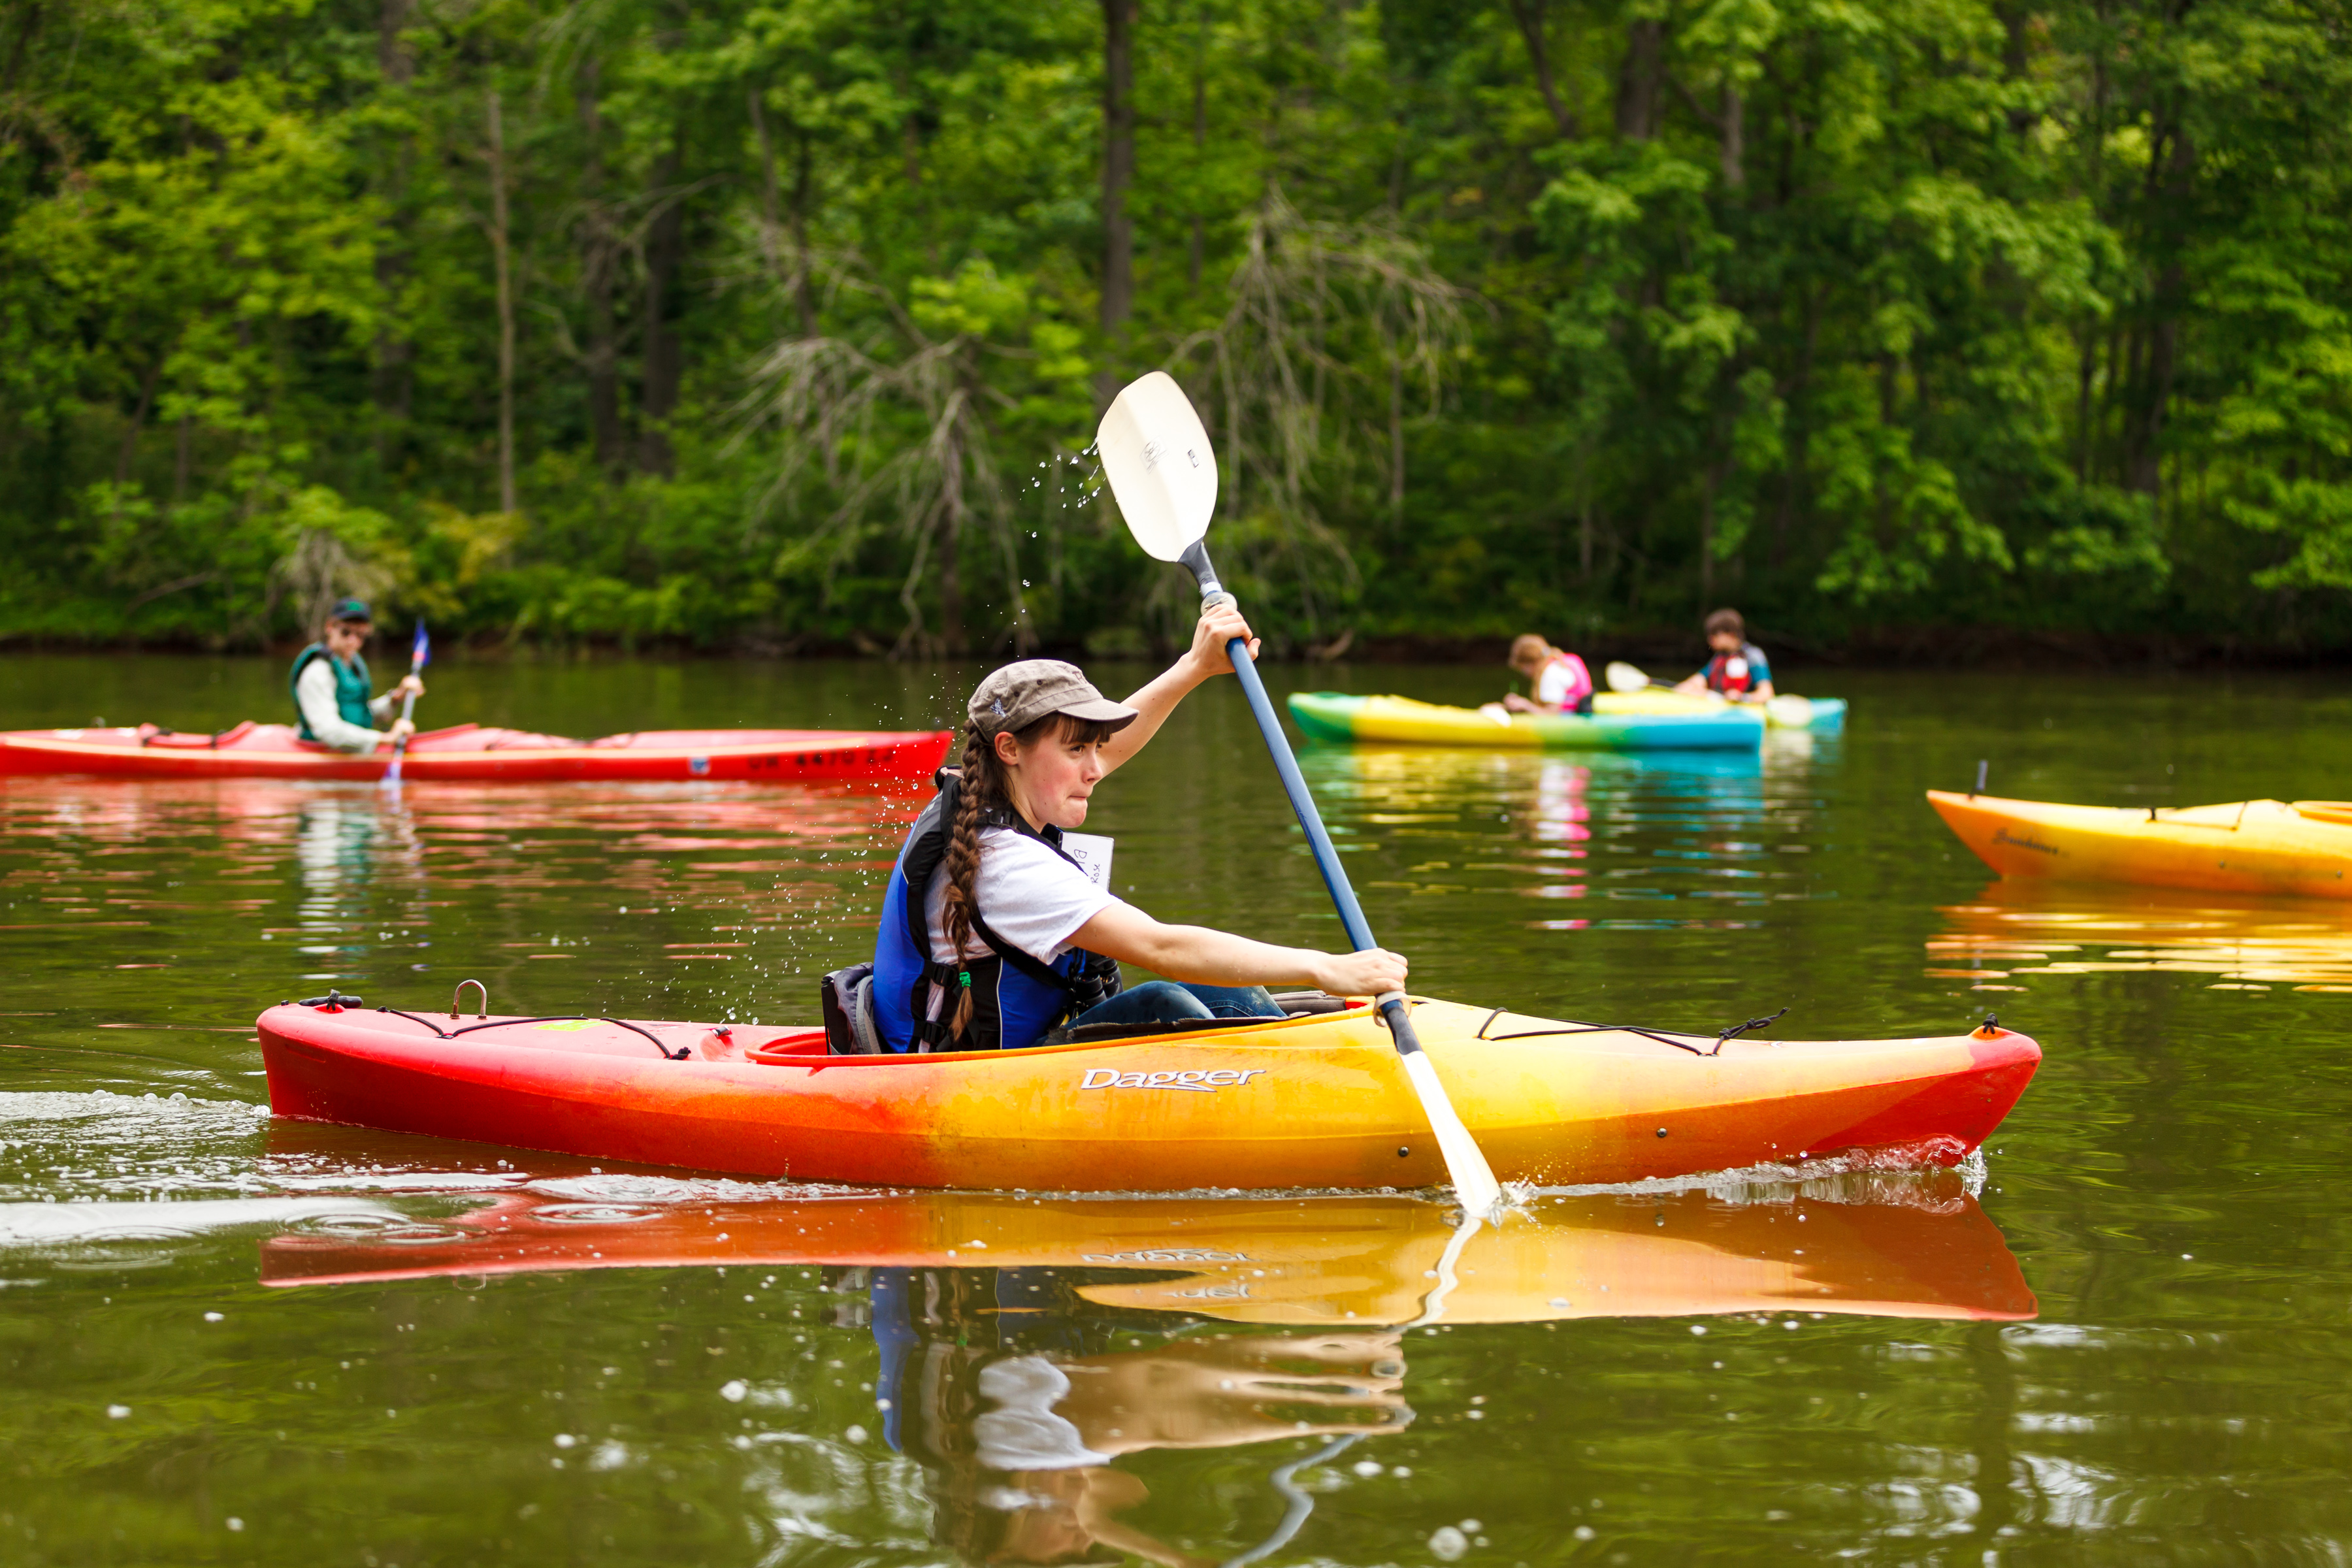 Kayaking - The Adaptive Sports Connection